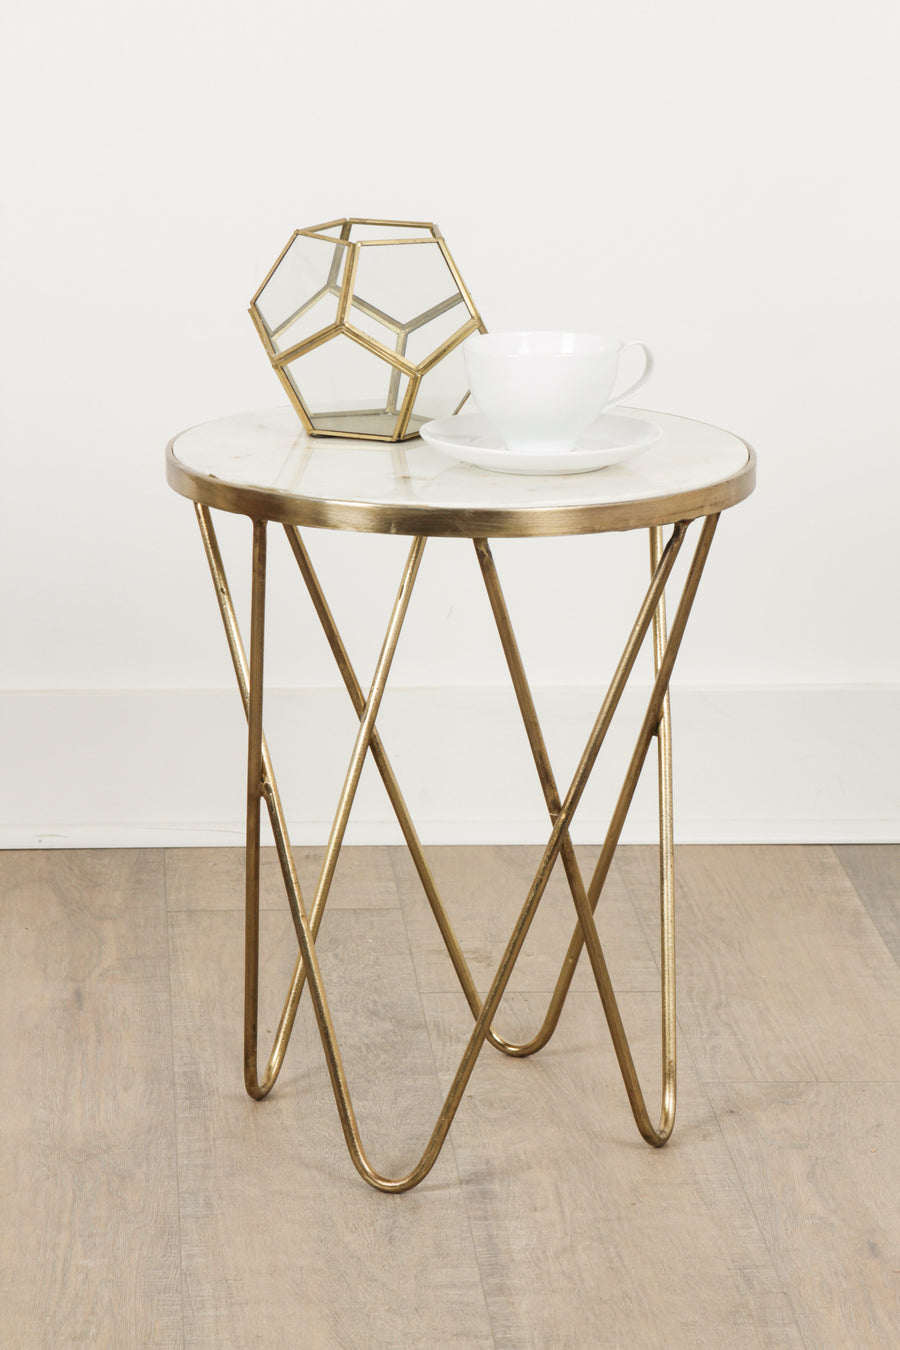 Klip Round Marble Top Accent Table